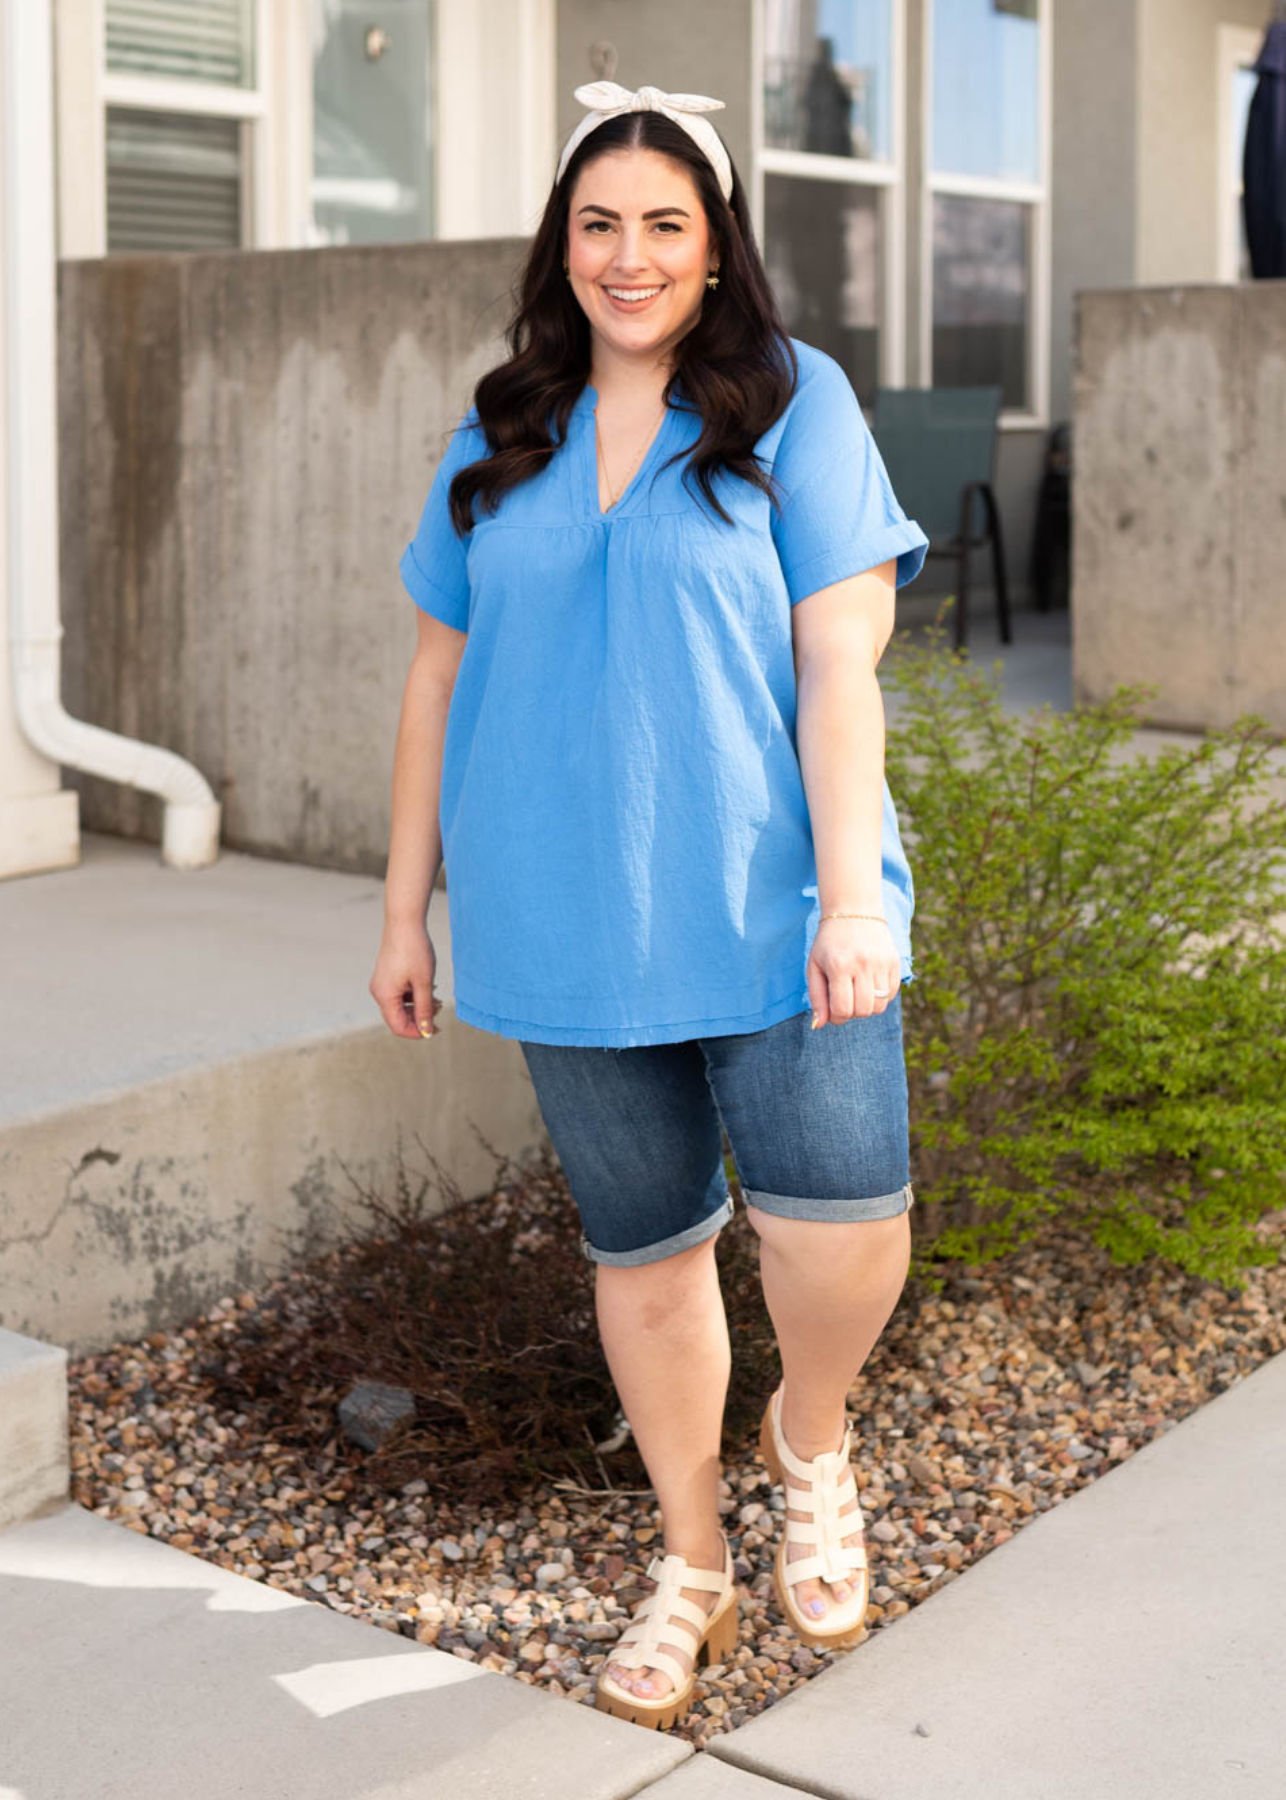 Blue v-neck top with short sleeves